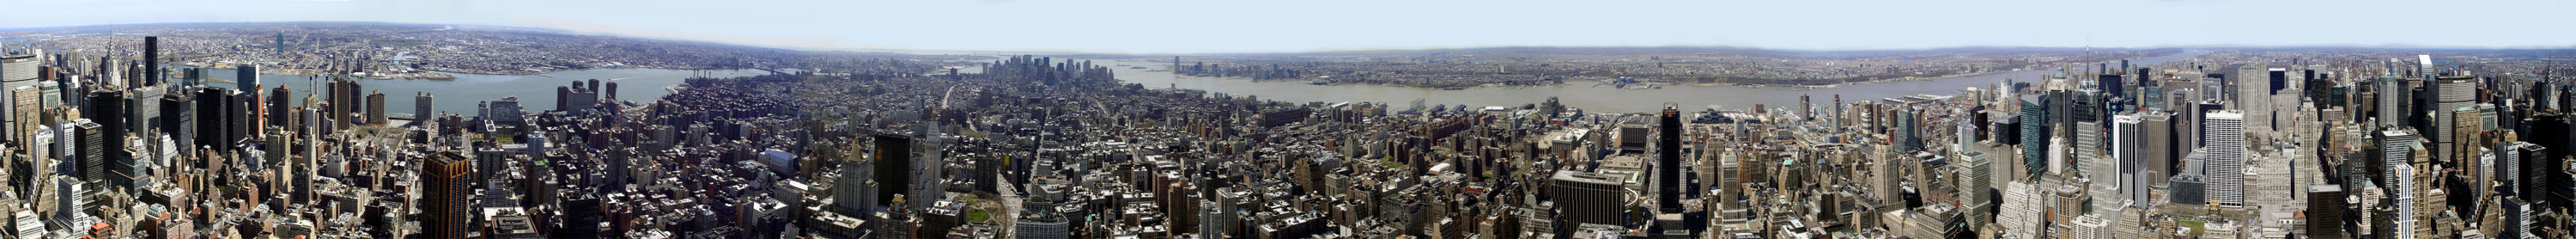 360°-Panorama of Midtown Manhattan, the largest central business district in the United States.